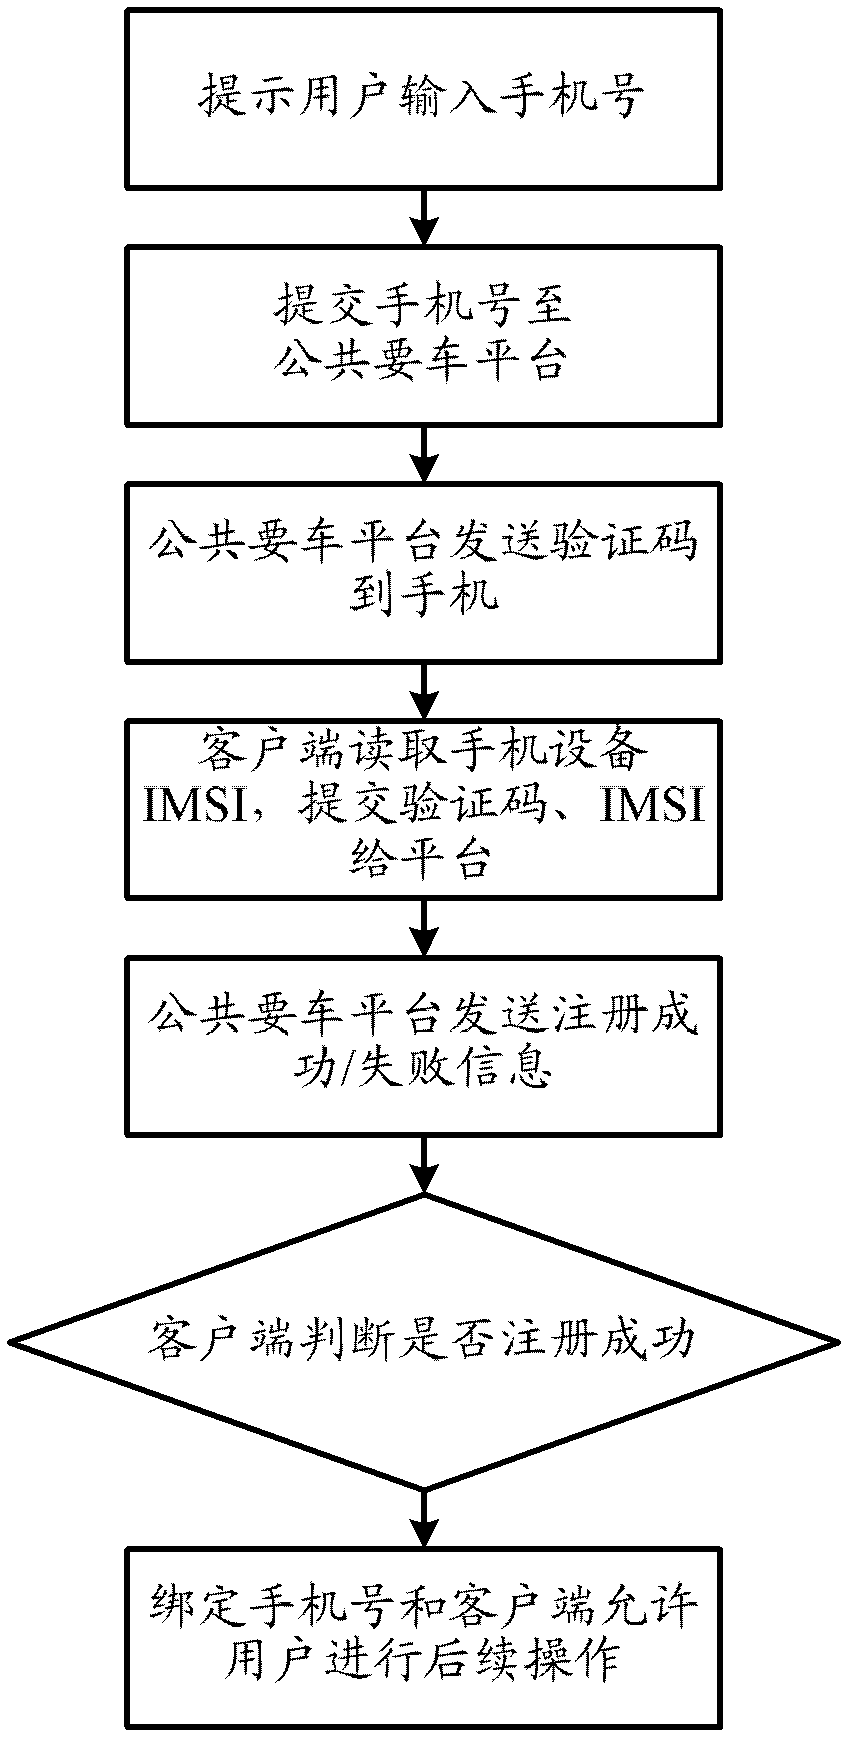 Taxi service system and method based on two-dimensional codes